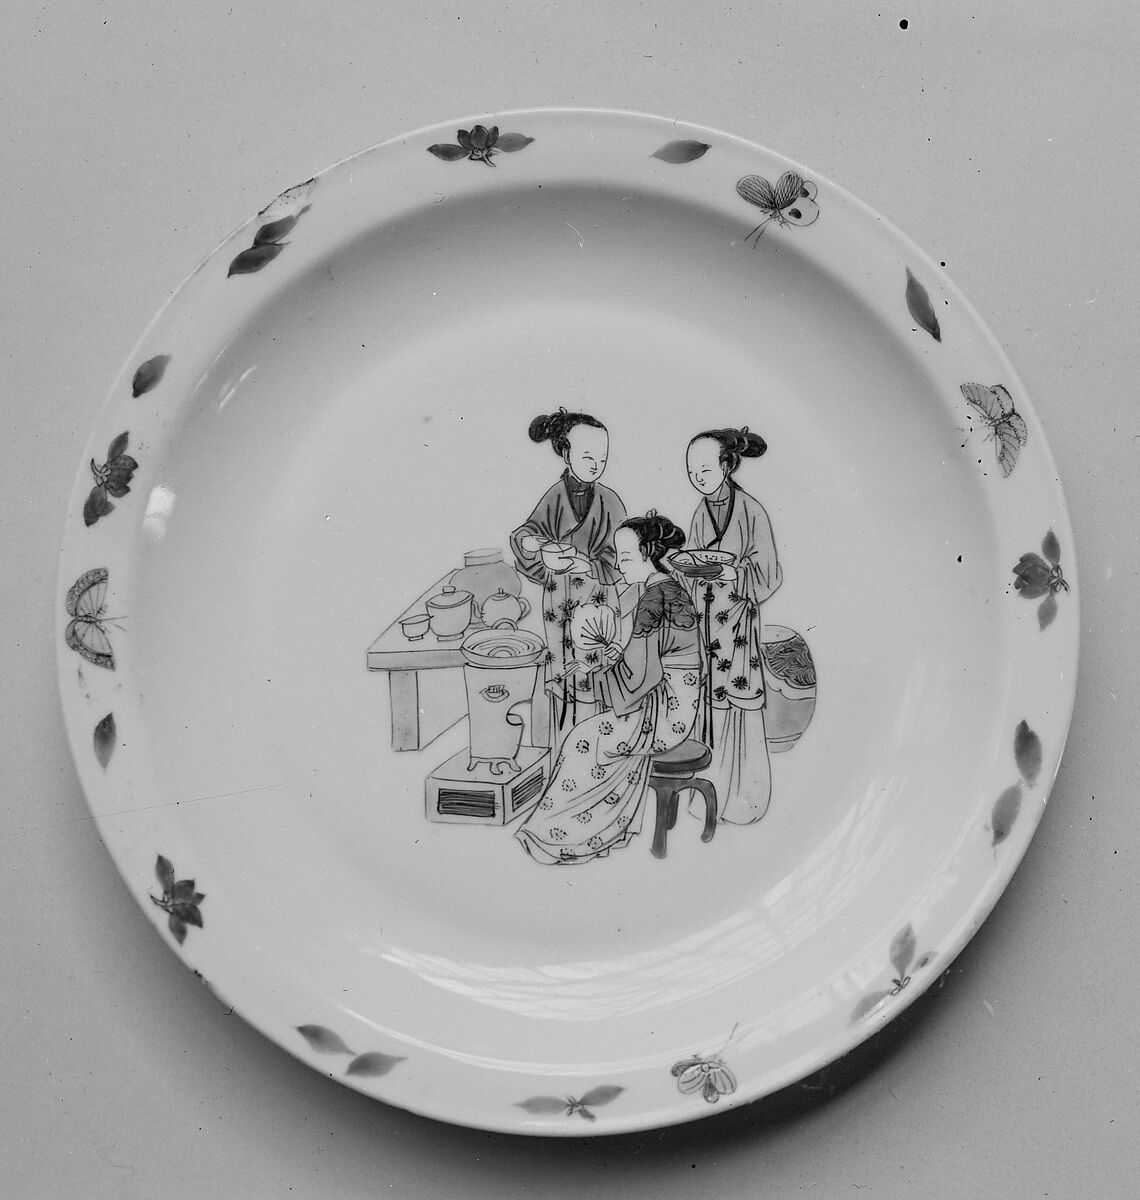 Plate with women cooking, Porcelain painted with overglaze polychrome enamels (Jingdezhen ware), China 